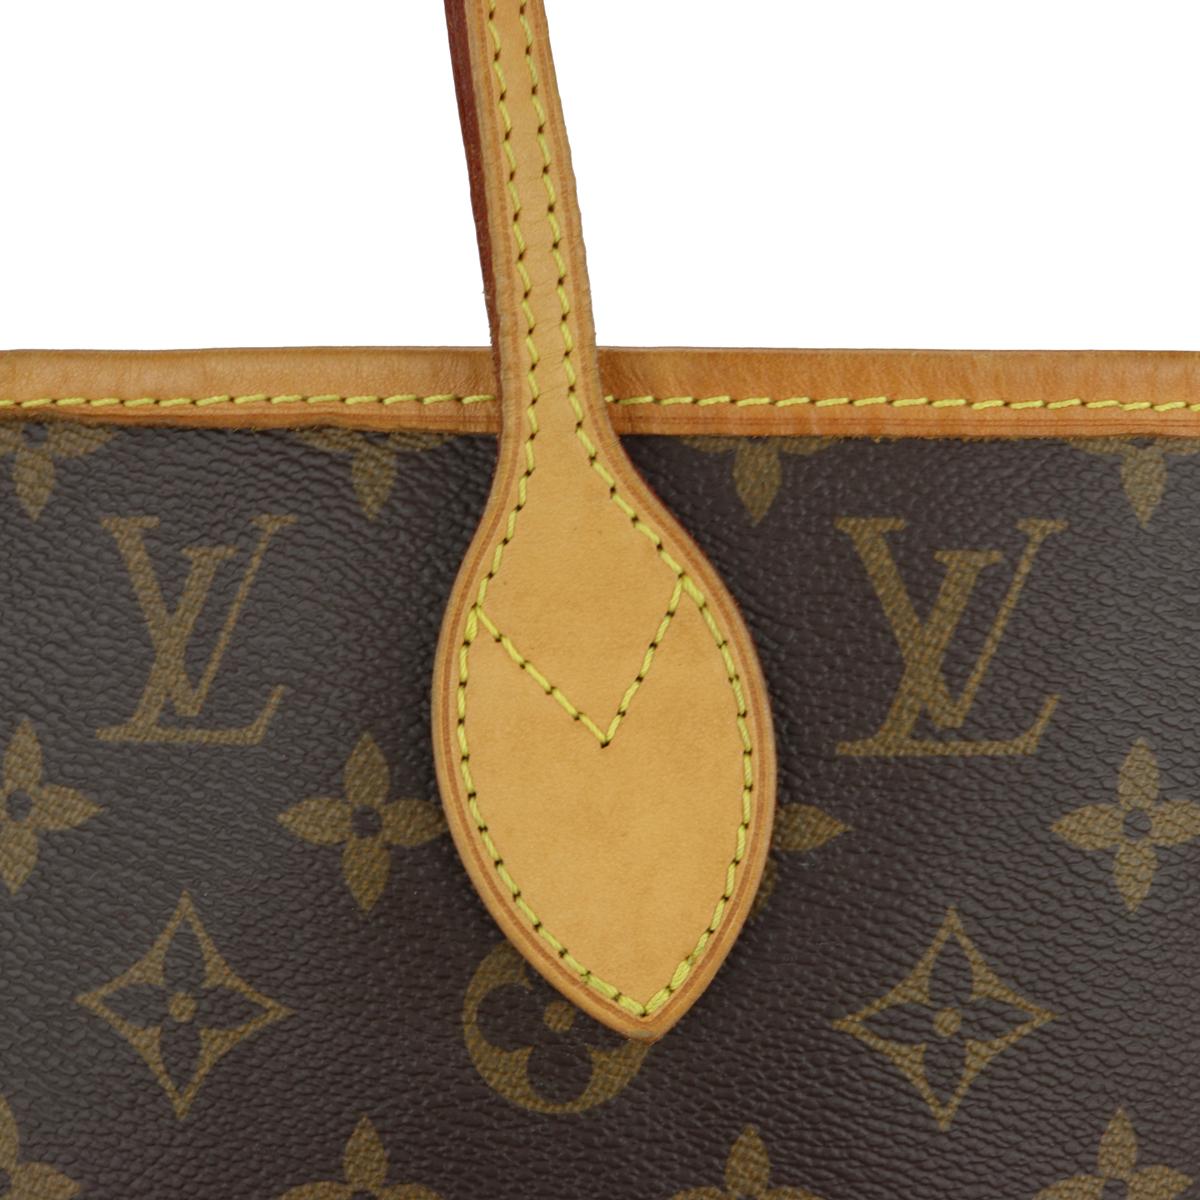 Louis Vuitton Neverfull MM Bag in Monogram with Beige Interior 2016 6